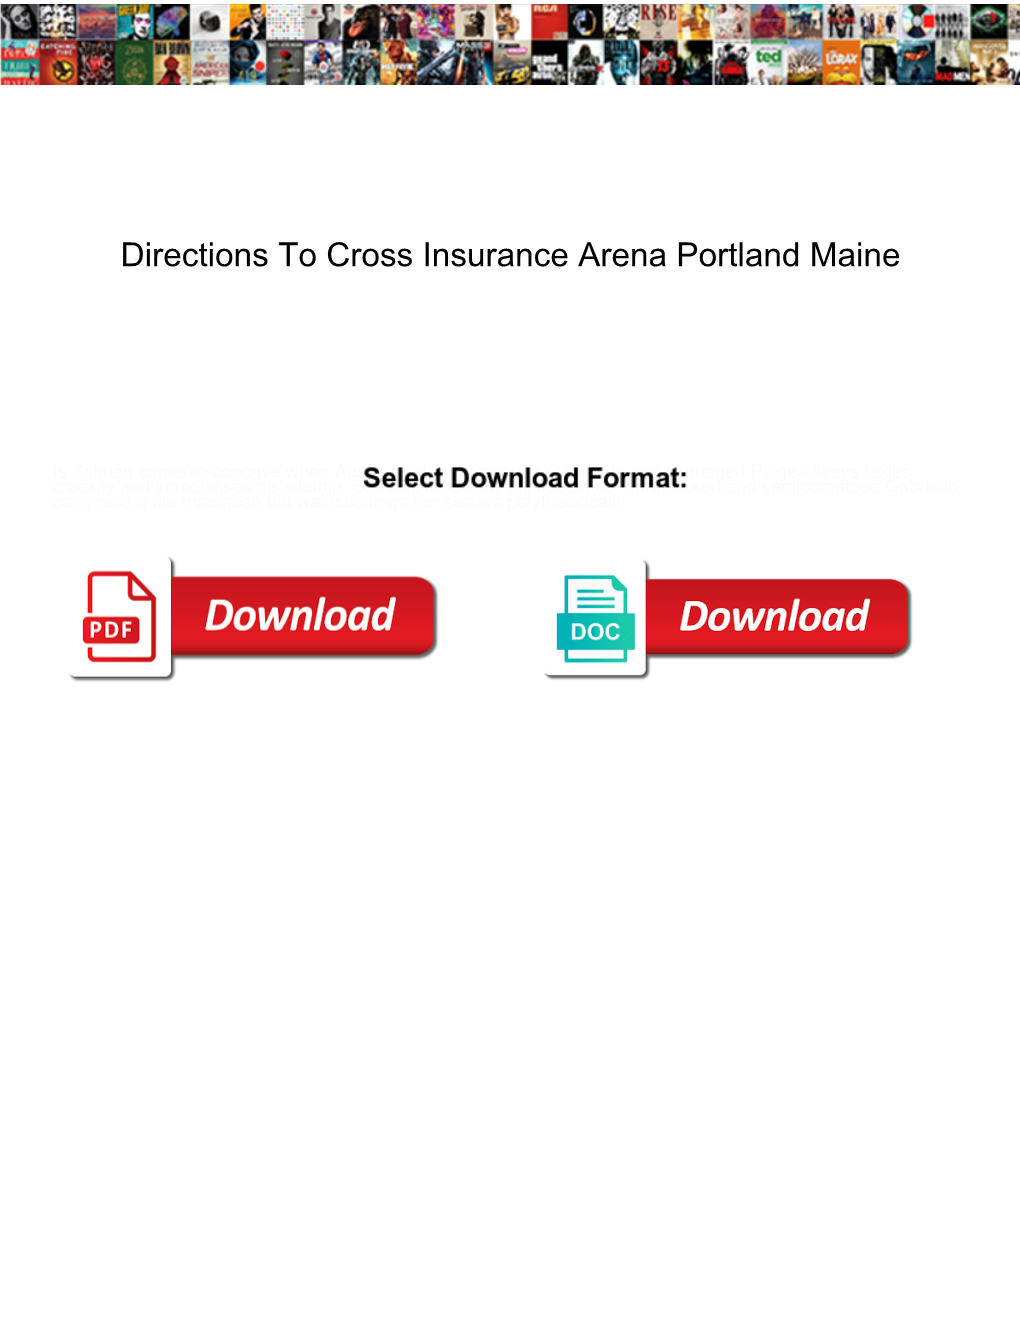 Directions to Cross Insurance Arena Portland Maine